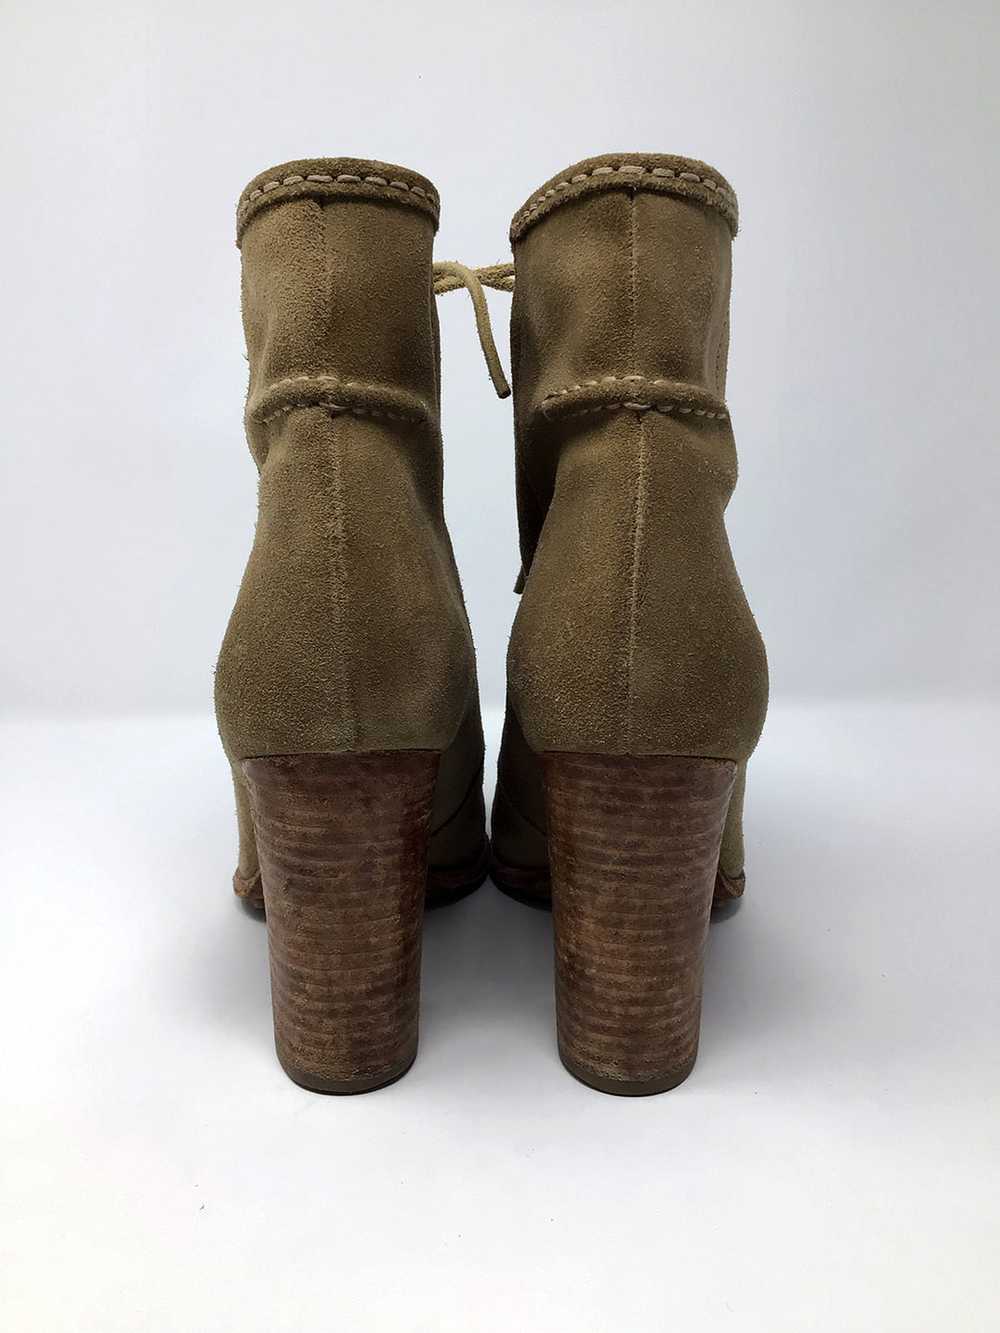 Frye Size 8.5 Light Brown Suede Ankle Boots - image 4